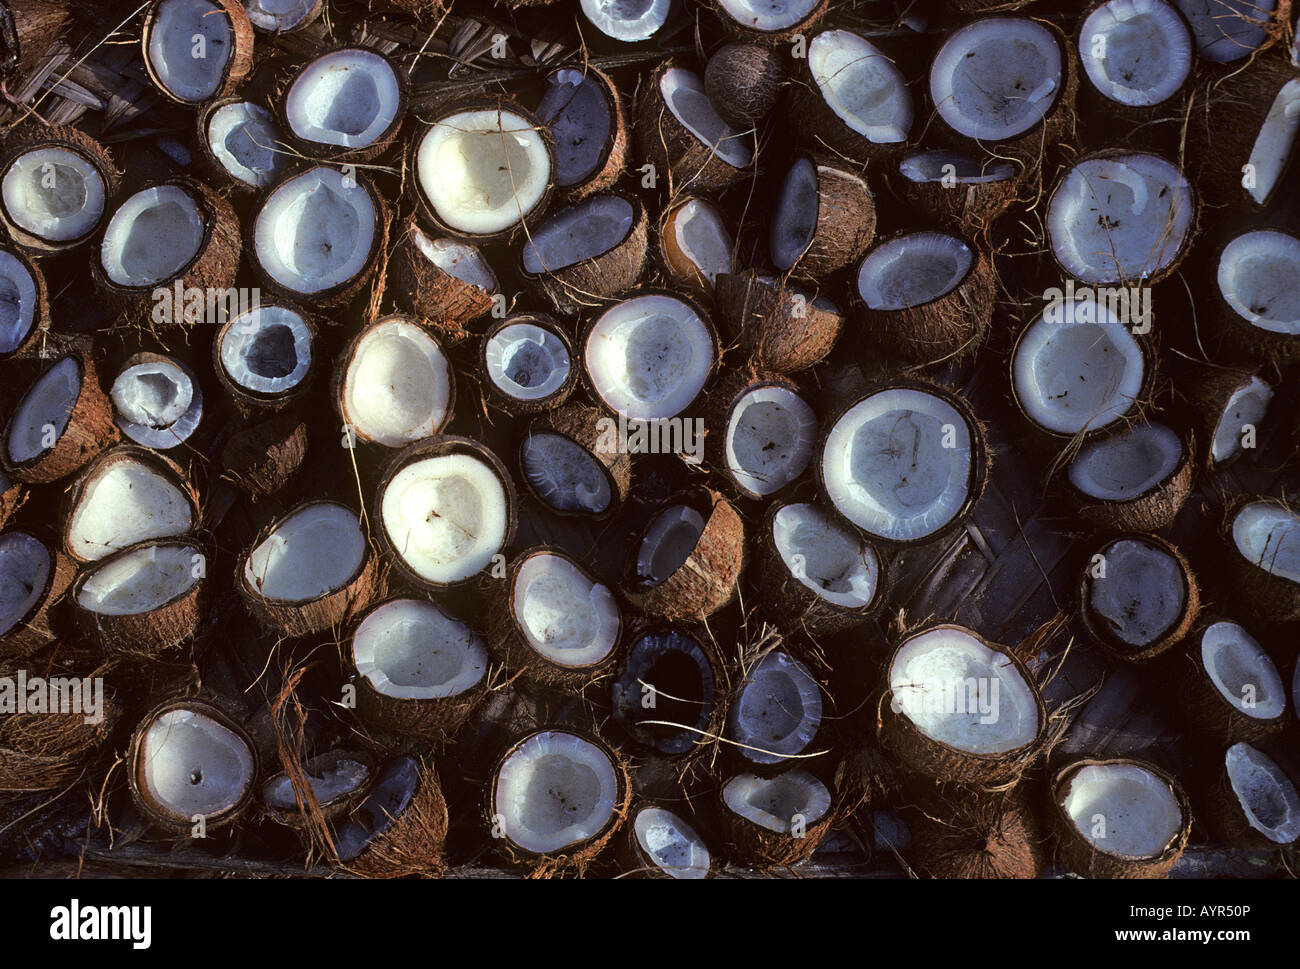 Cracked-open coconuts (Cocos nucifera) used in the production of copra on Bangaram Island, Lakshadweep, India Stock Photo